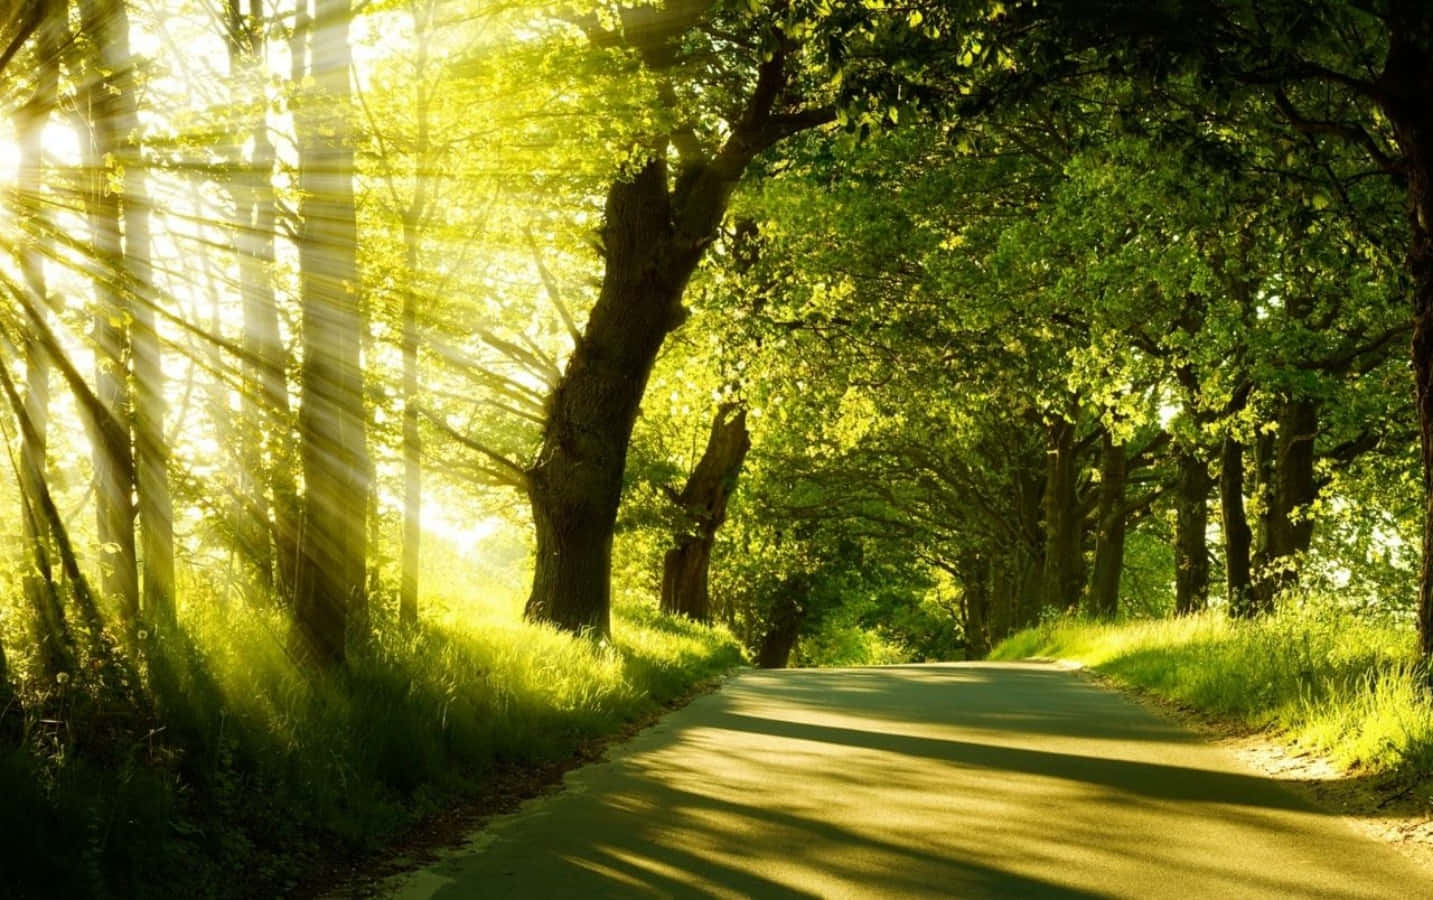 Sunny Day Scenery Woods Peaceful Wallpaper